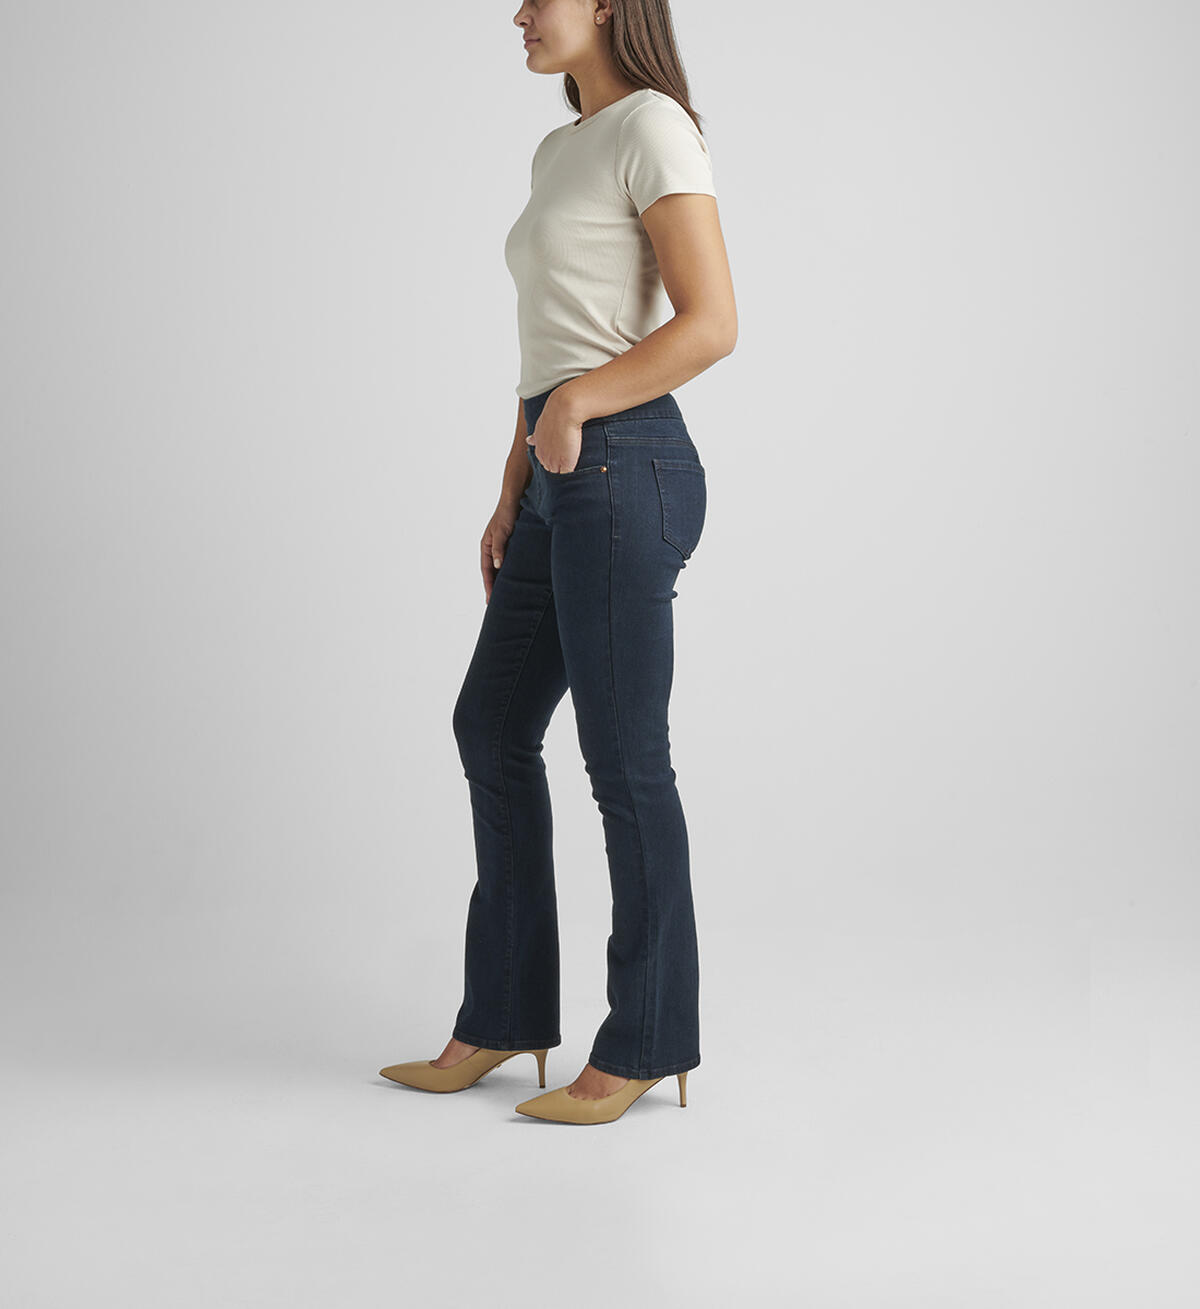 Paley Mid Rise Bootcut Pull-On Jeans Petite, , hi-res image number 2